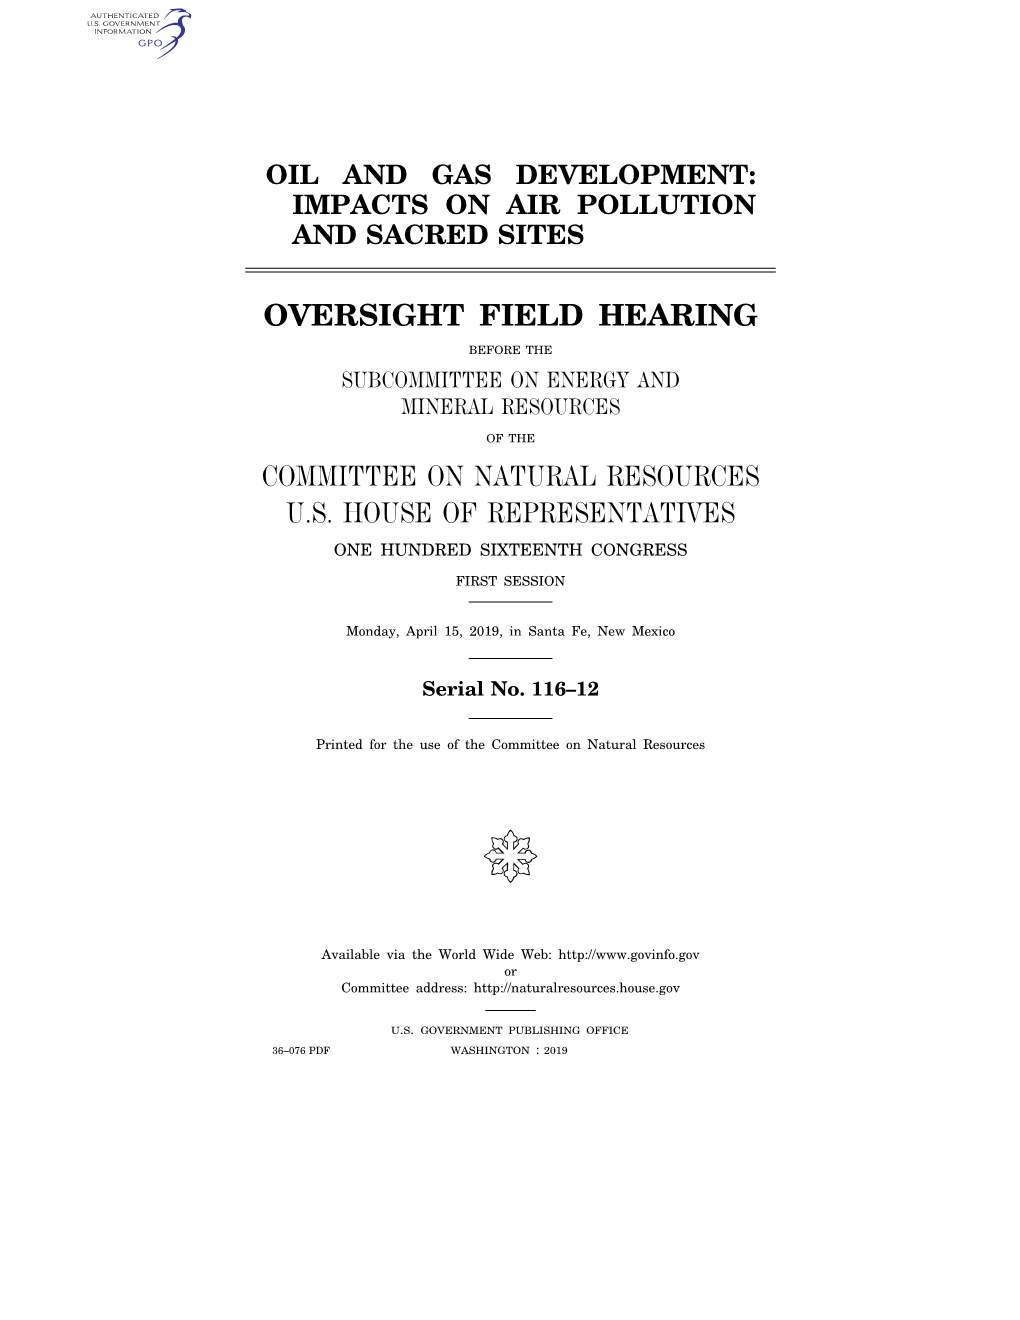 Oversight Field Hearing Committee on Natural Resources U.S. House of Representatives